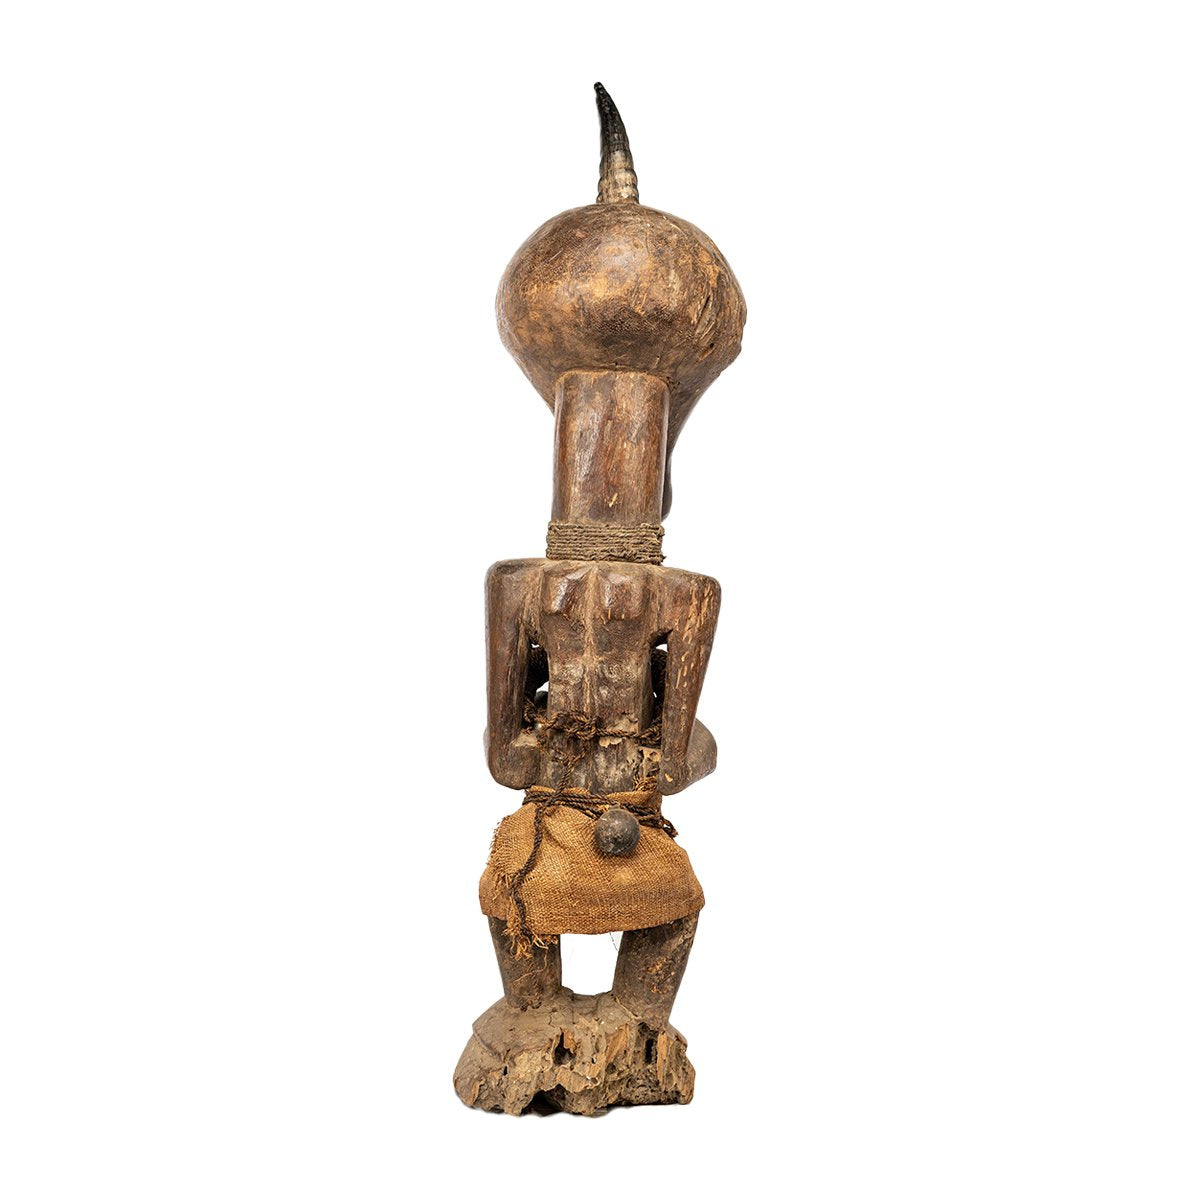 Nkishi idol - Authentic African handicrafts | Clothing, bags, painting, toys & more - CULTURE HUB by Muthoni Unchained